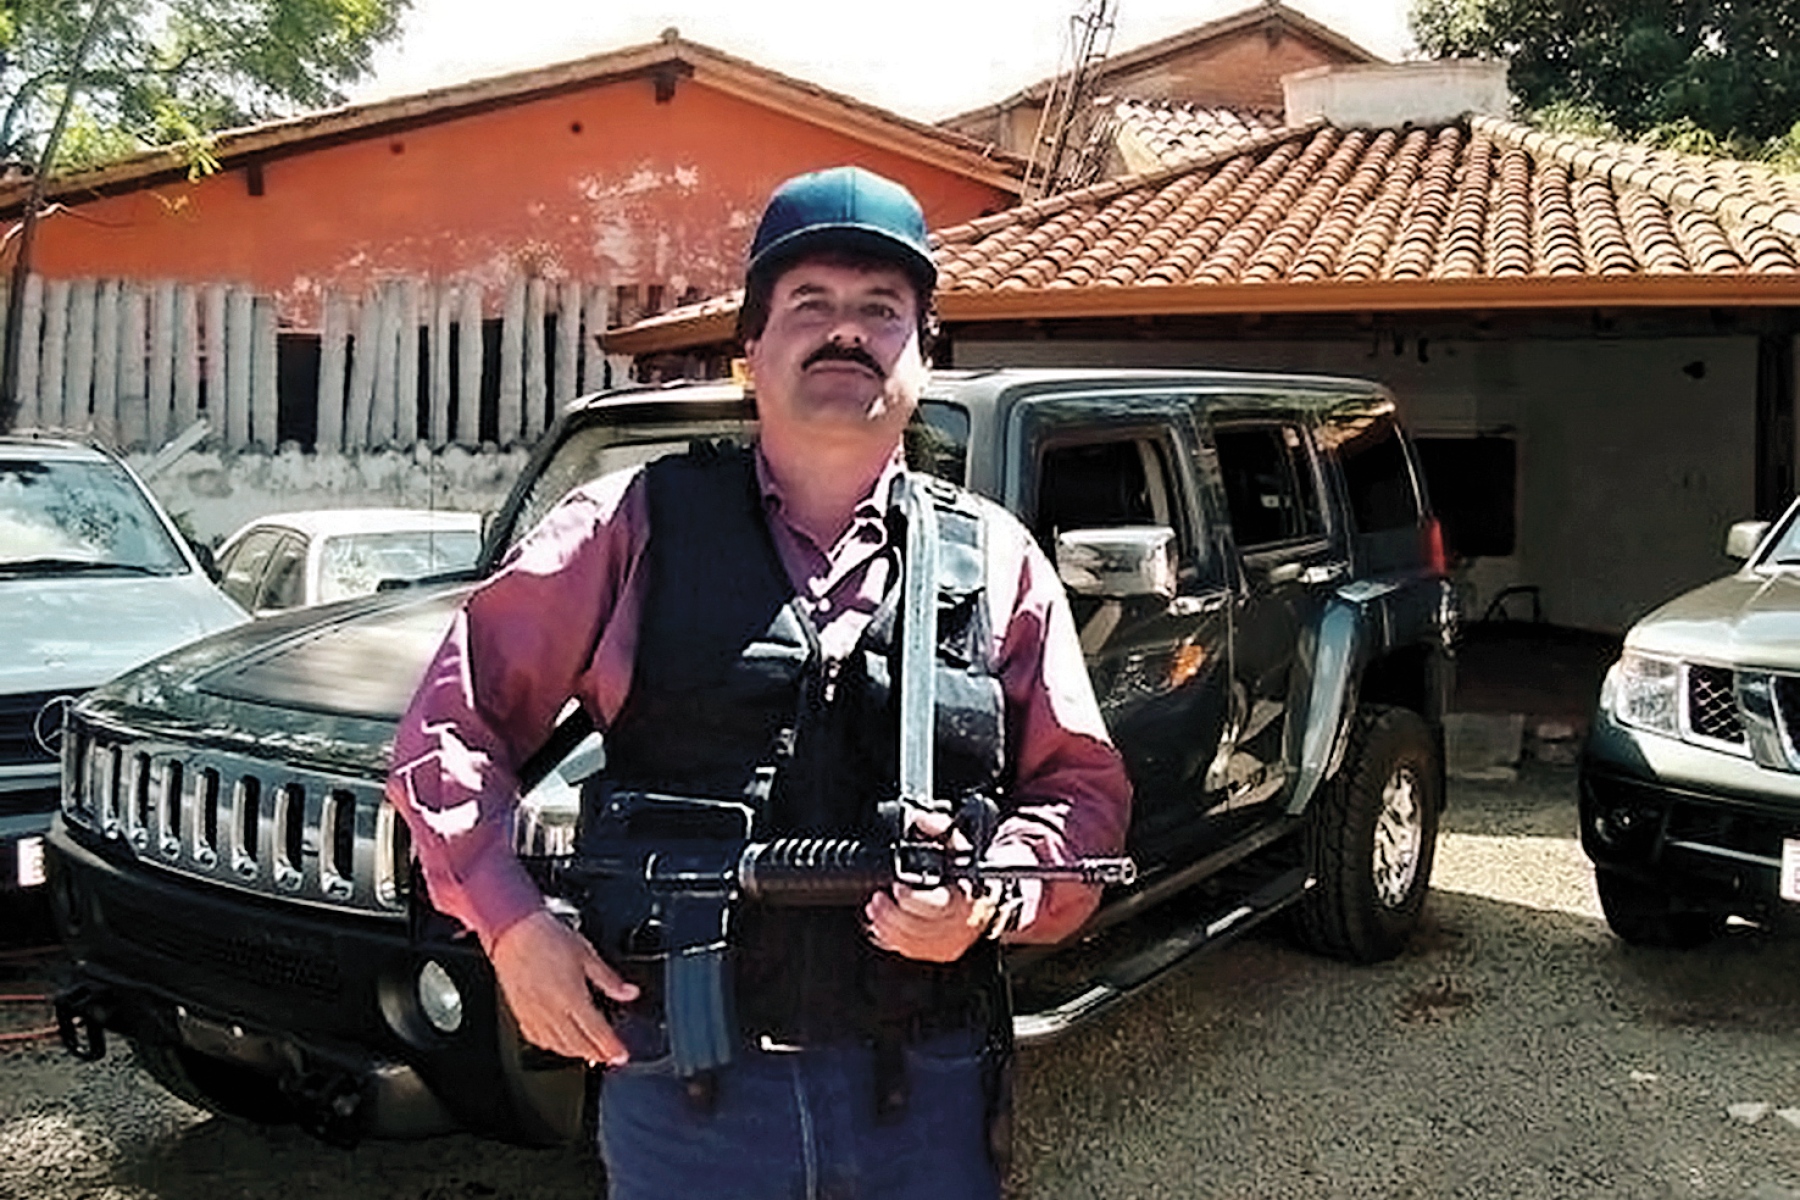 El Chapo: The Life and Crimes of a Drug Lord